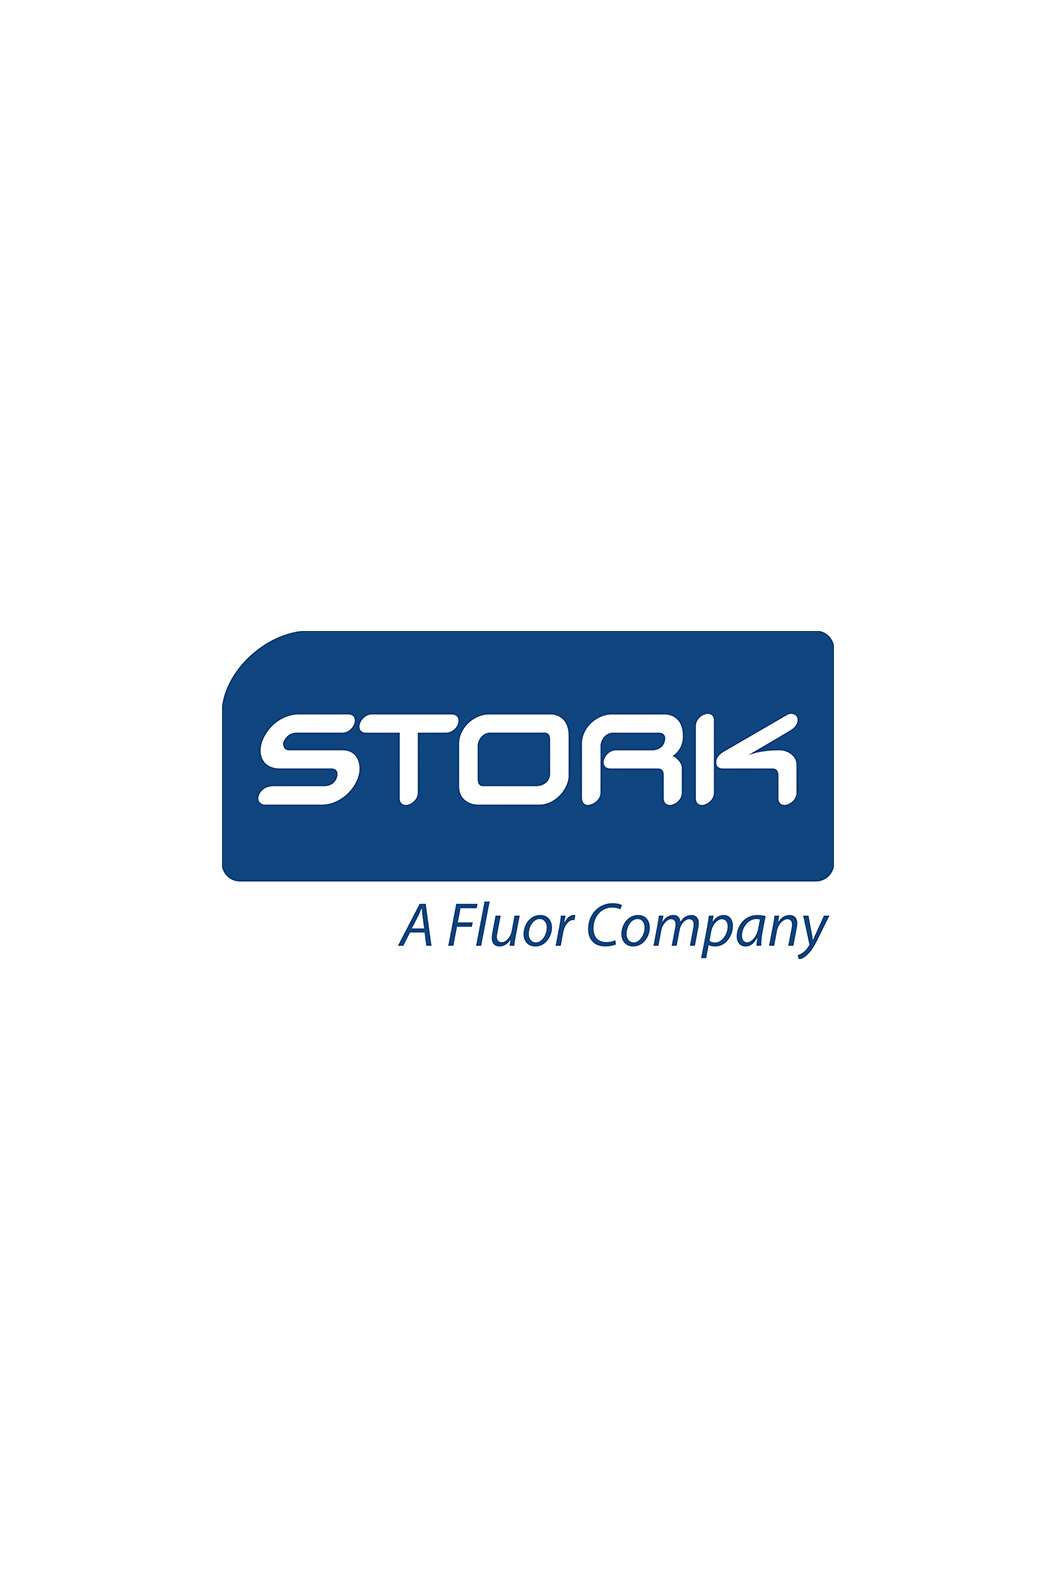 Stork Awarded Integrated Operations and Maintenance Contract Renewal by Ecopetrol